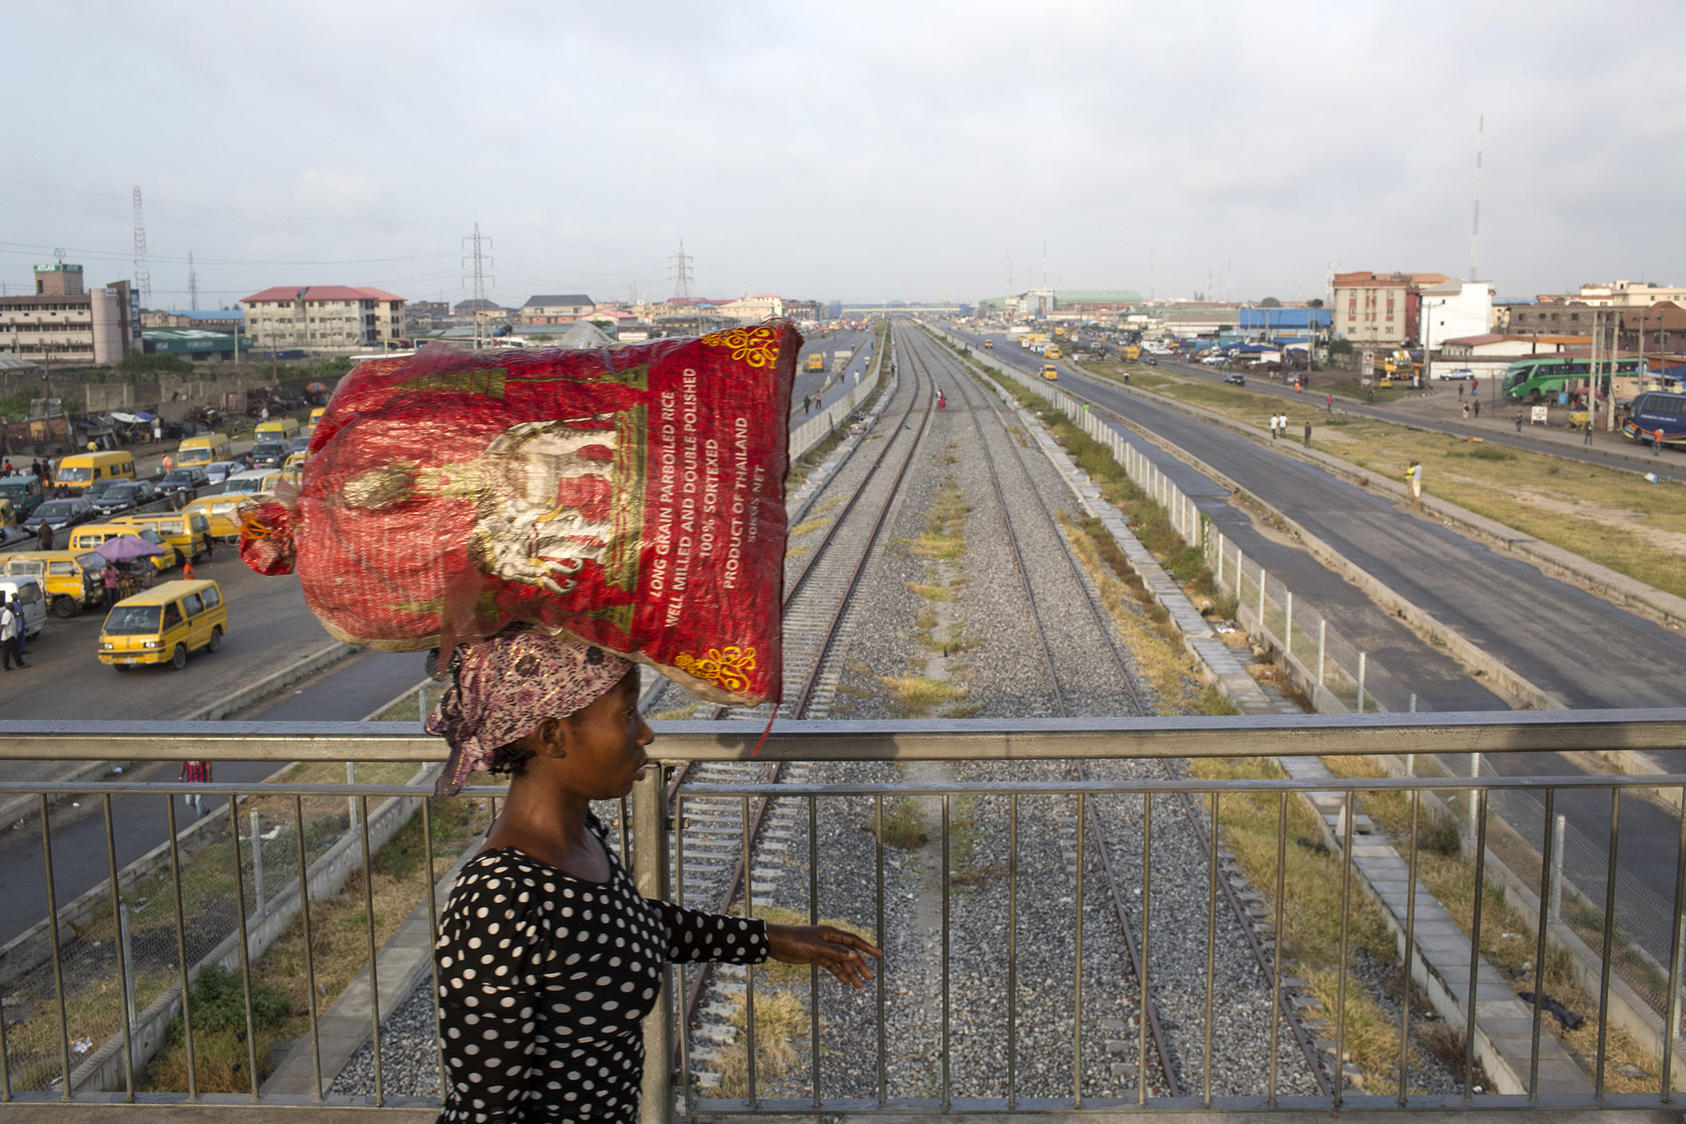 The light rail construction in Lagos, Nigeria, Aug. 12, 2015. To support its swelling trade in Nigeria, China is funneling billions of dollars to desperately needed infrastructure. (Tyler Hicks/The New York Times)